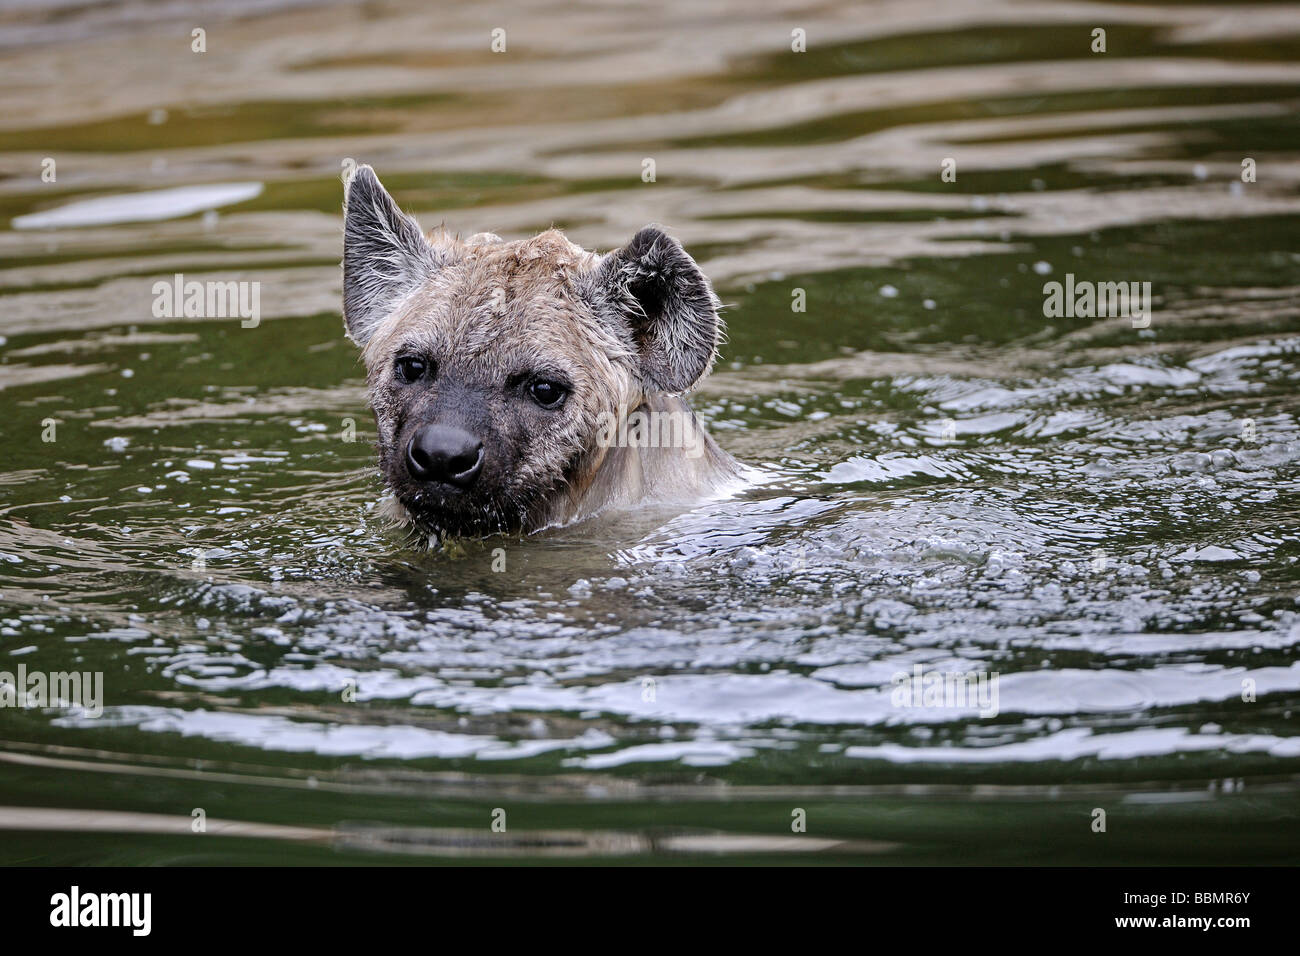 Young Spotted Hyena (Crocuta crocuta), swimming in the water Stock Photo -  Alamy